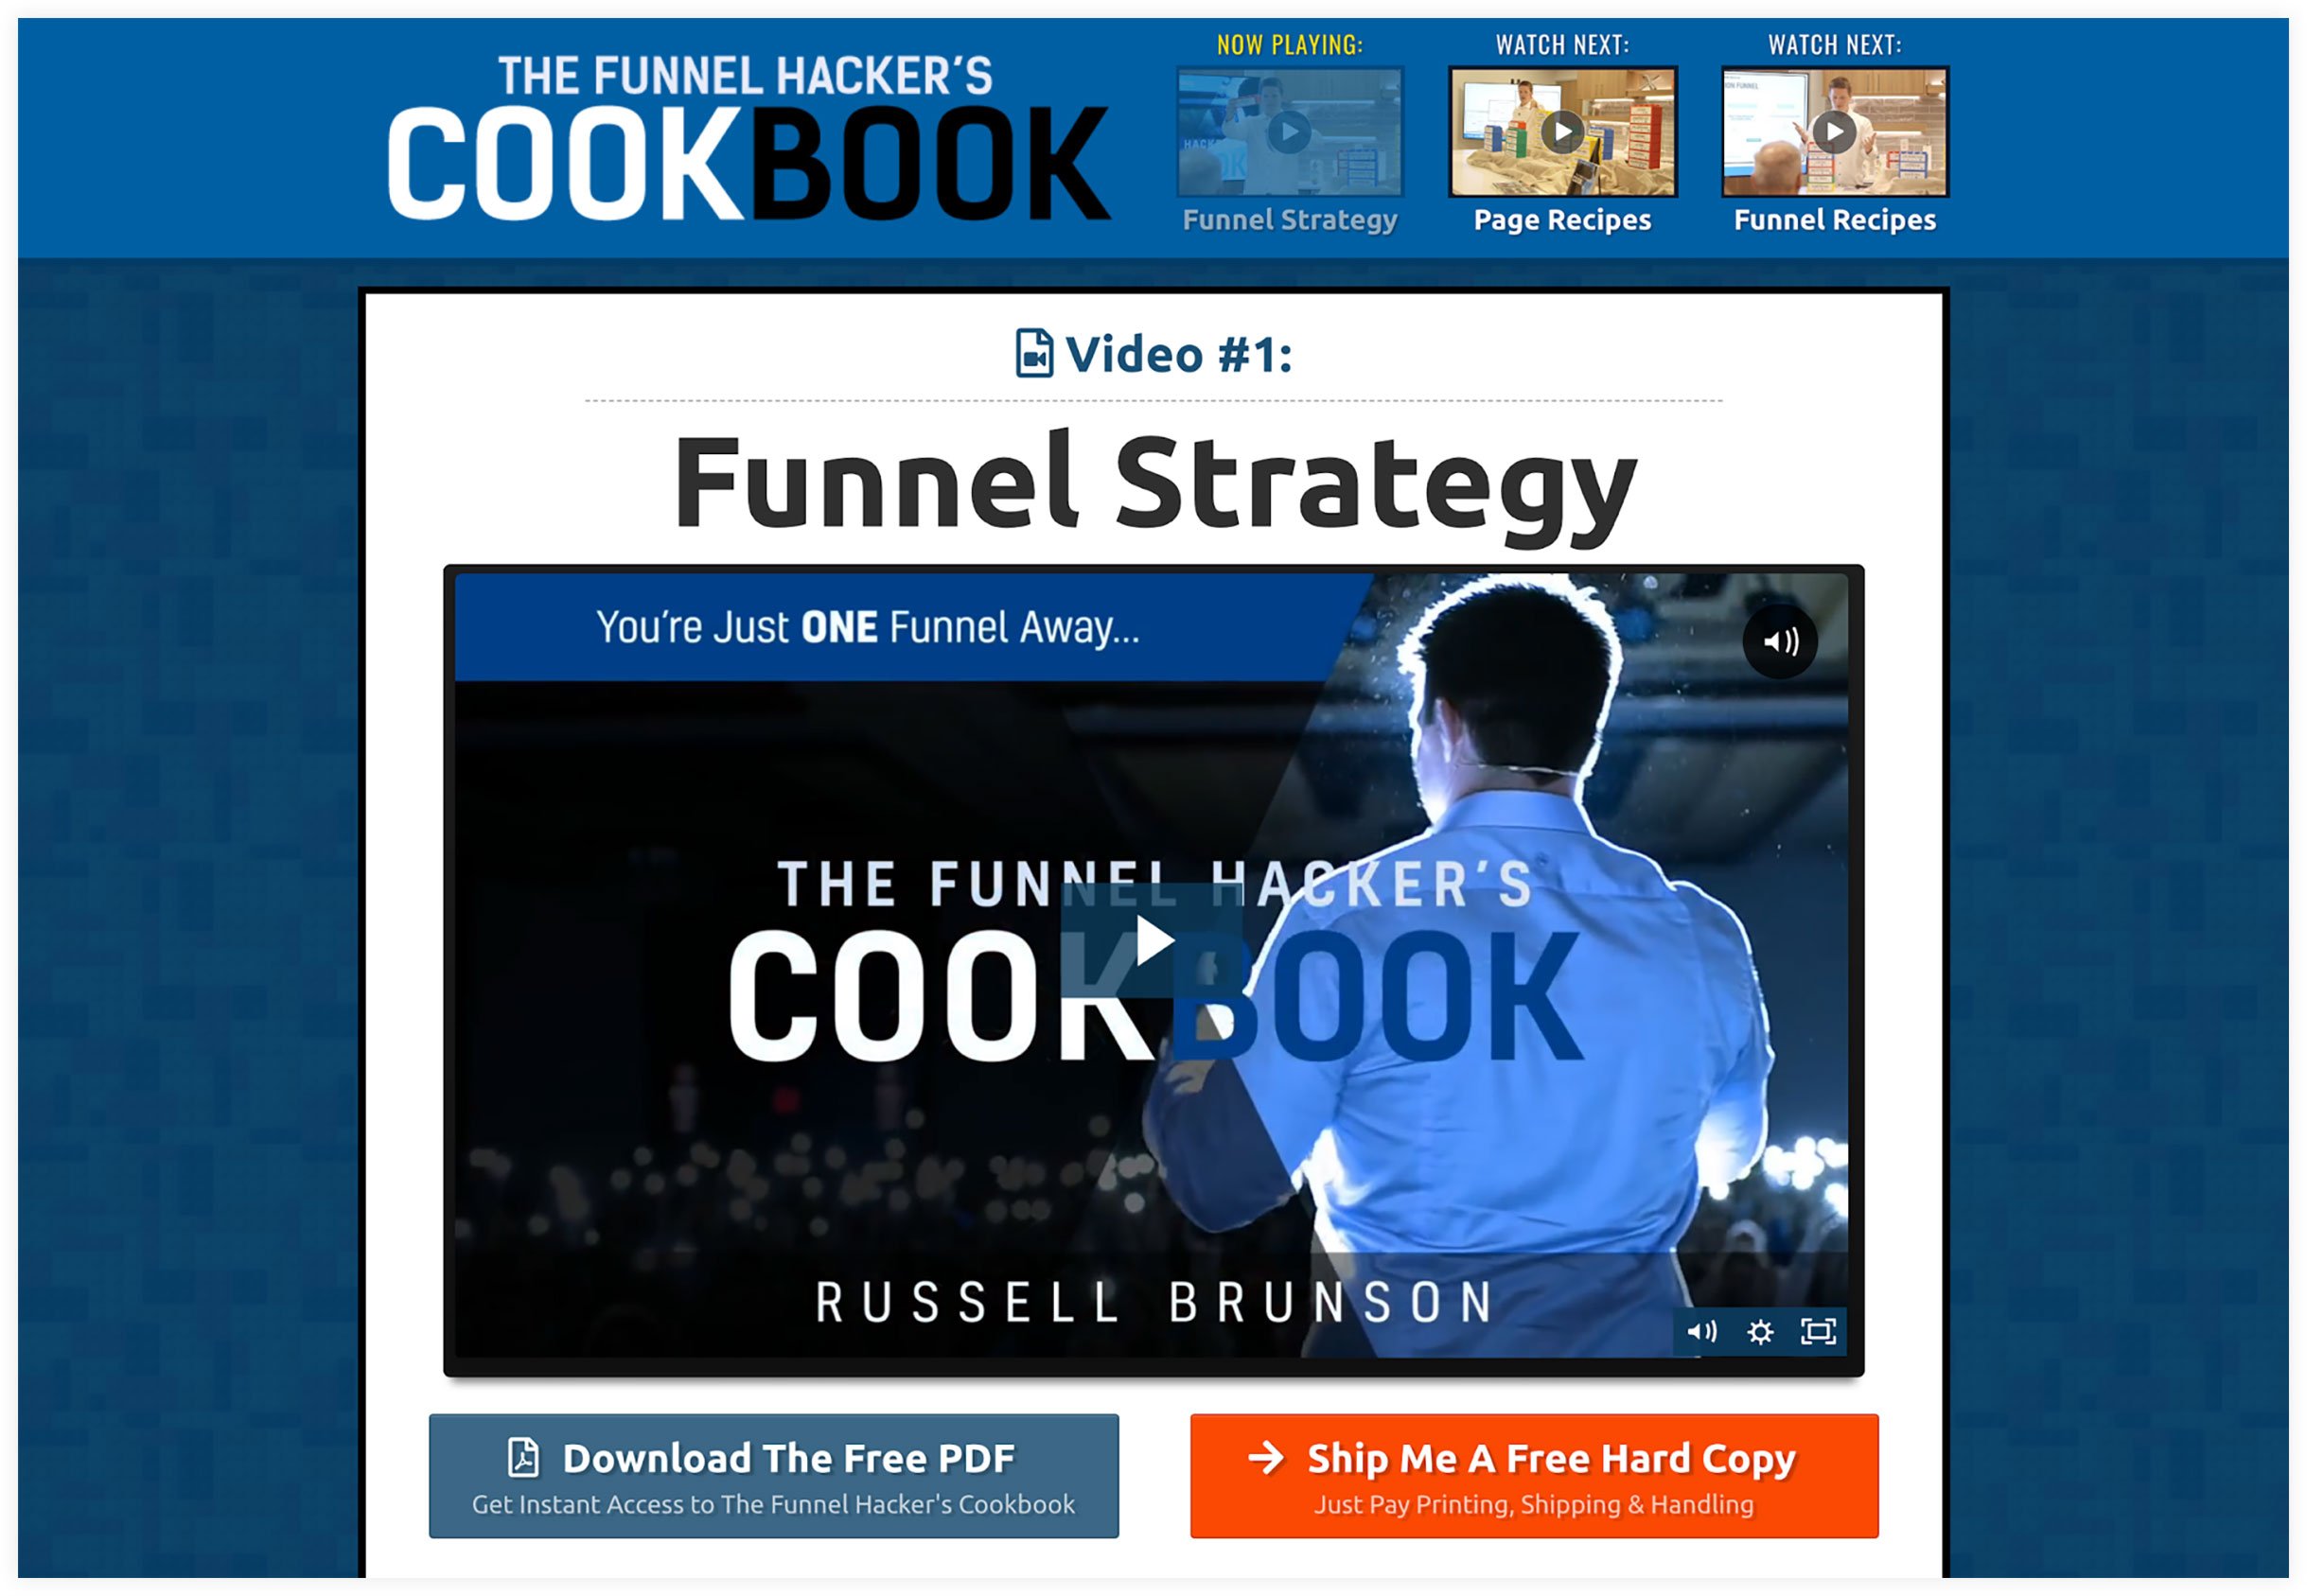 Email Marketing Funnels: How to Start Your Own Email Marketing Funnel